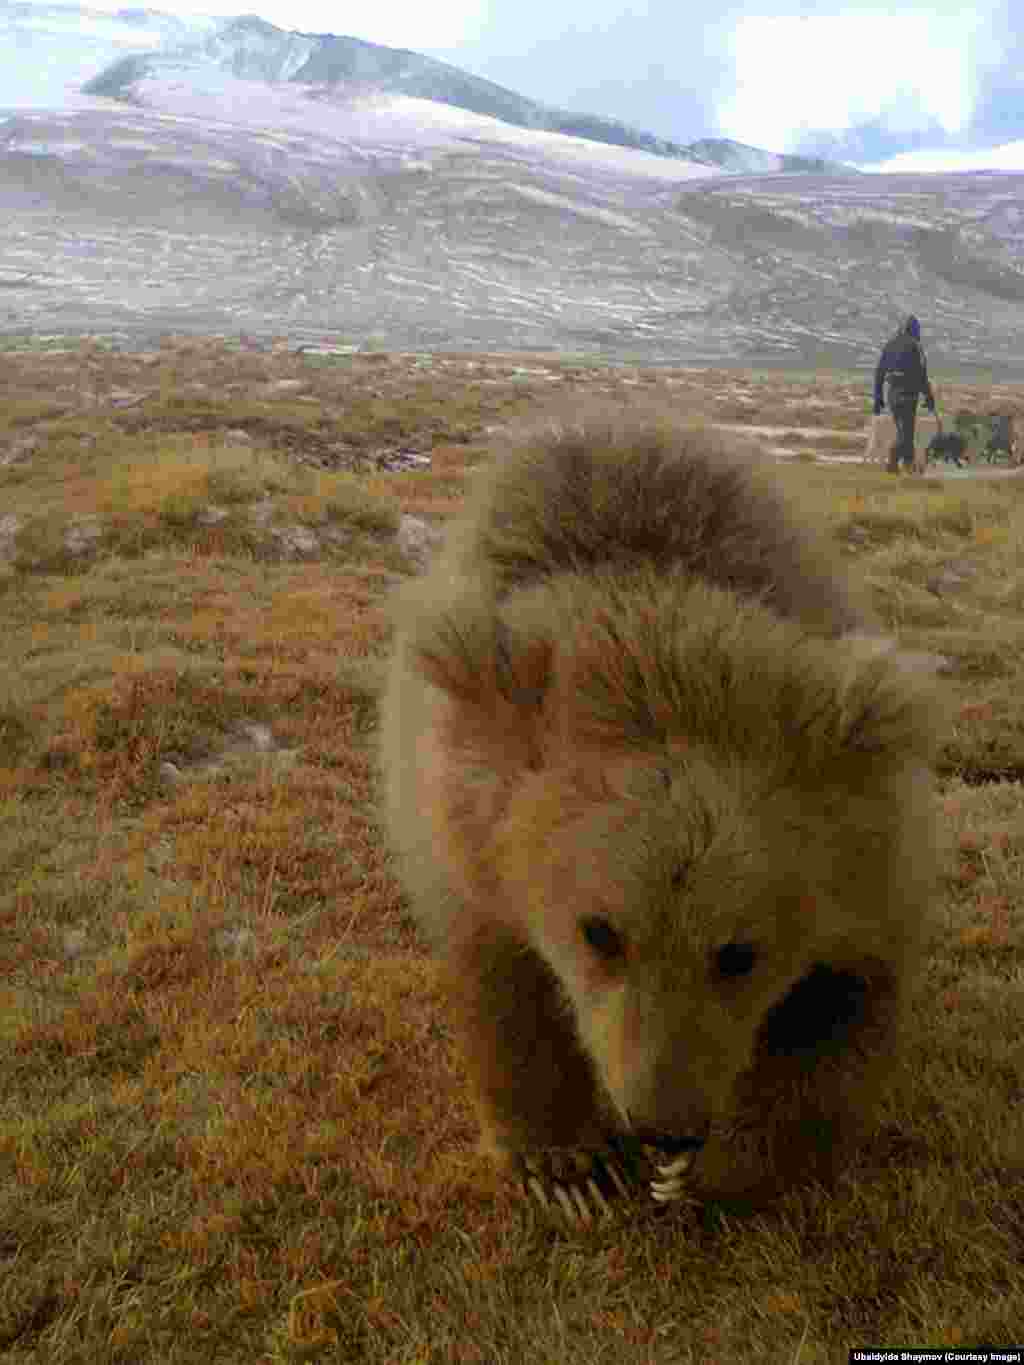 This bear cub, called Misha, was found after its mother was killed by hunters. A local shepherd has been taking care of the cub.